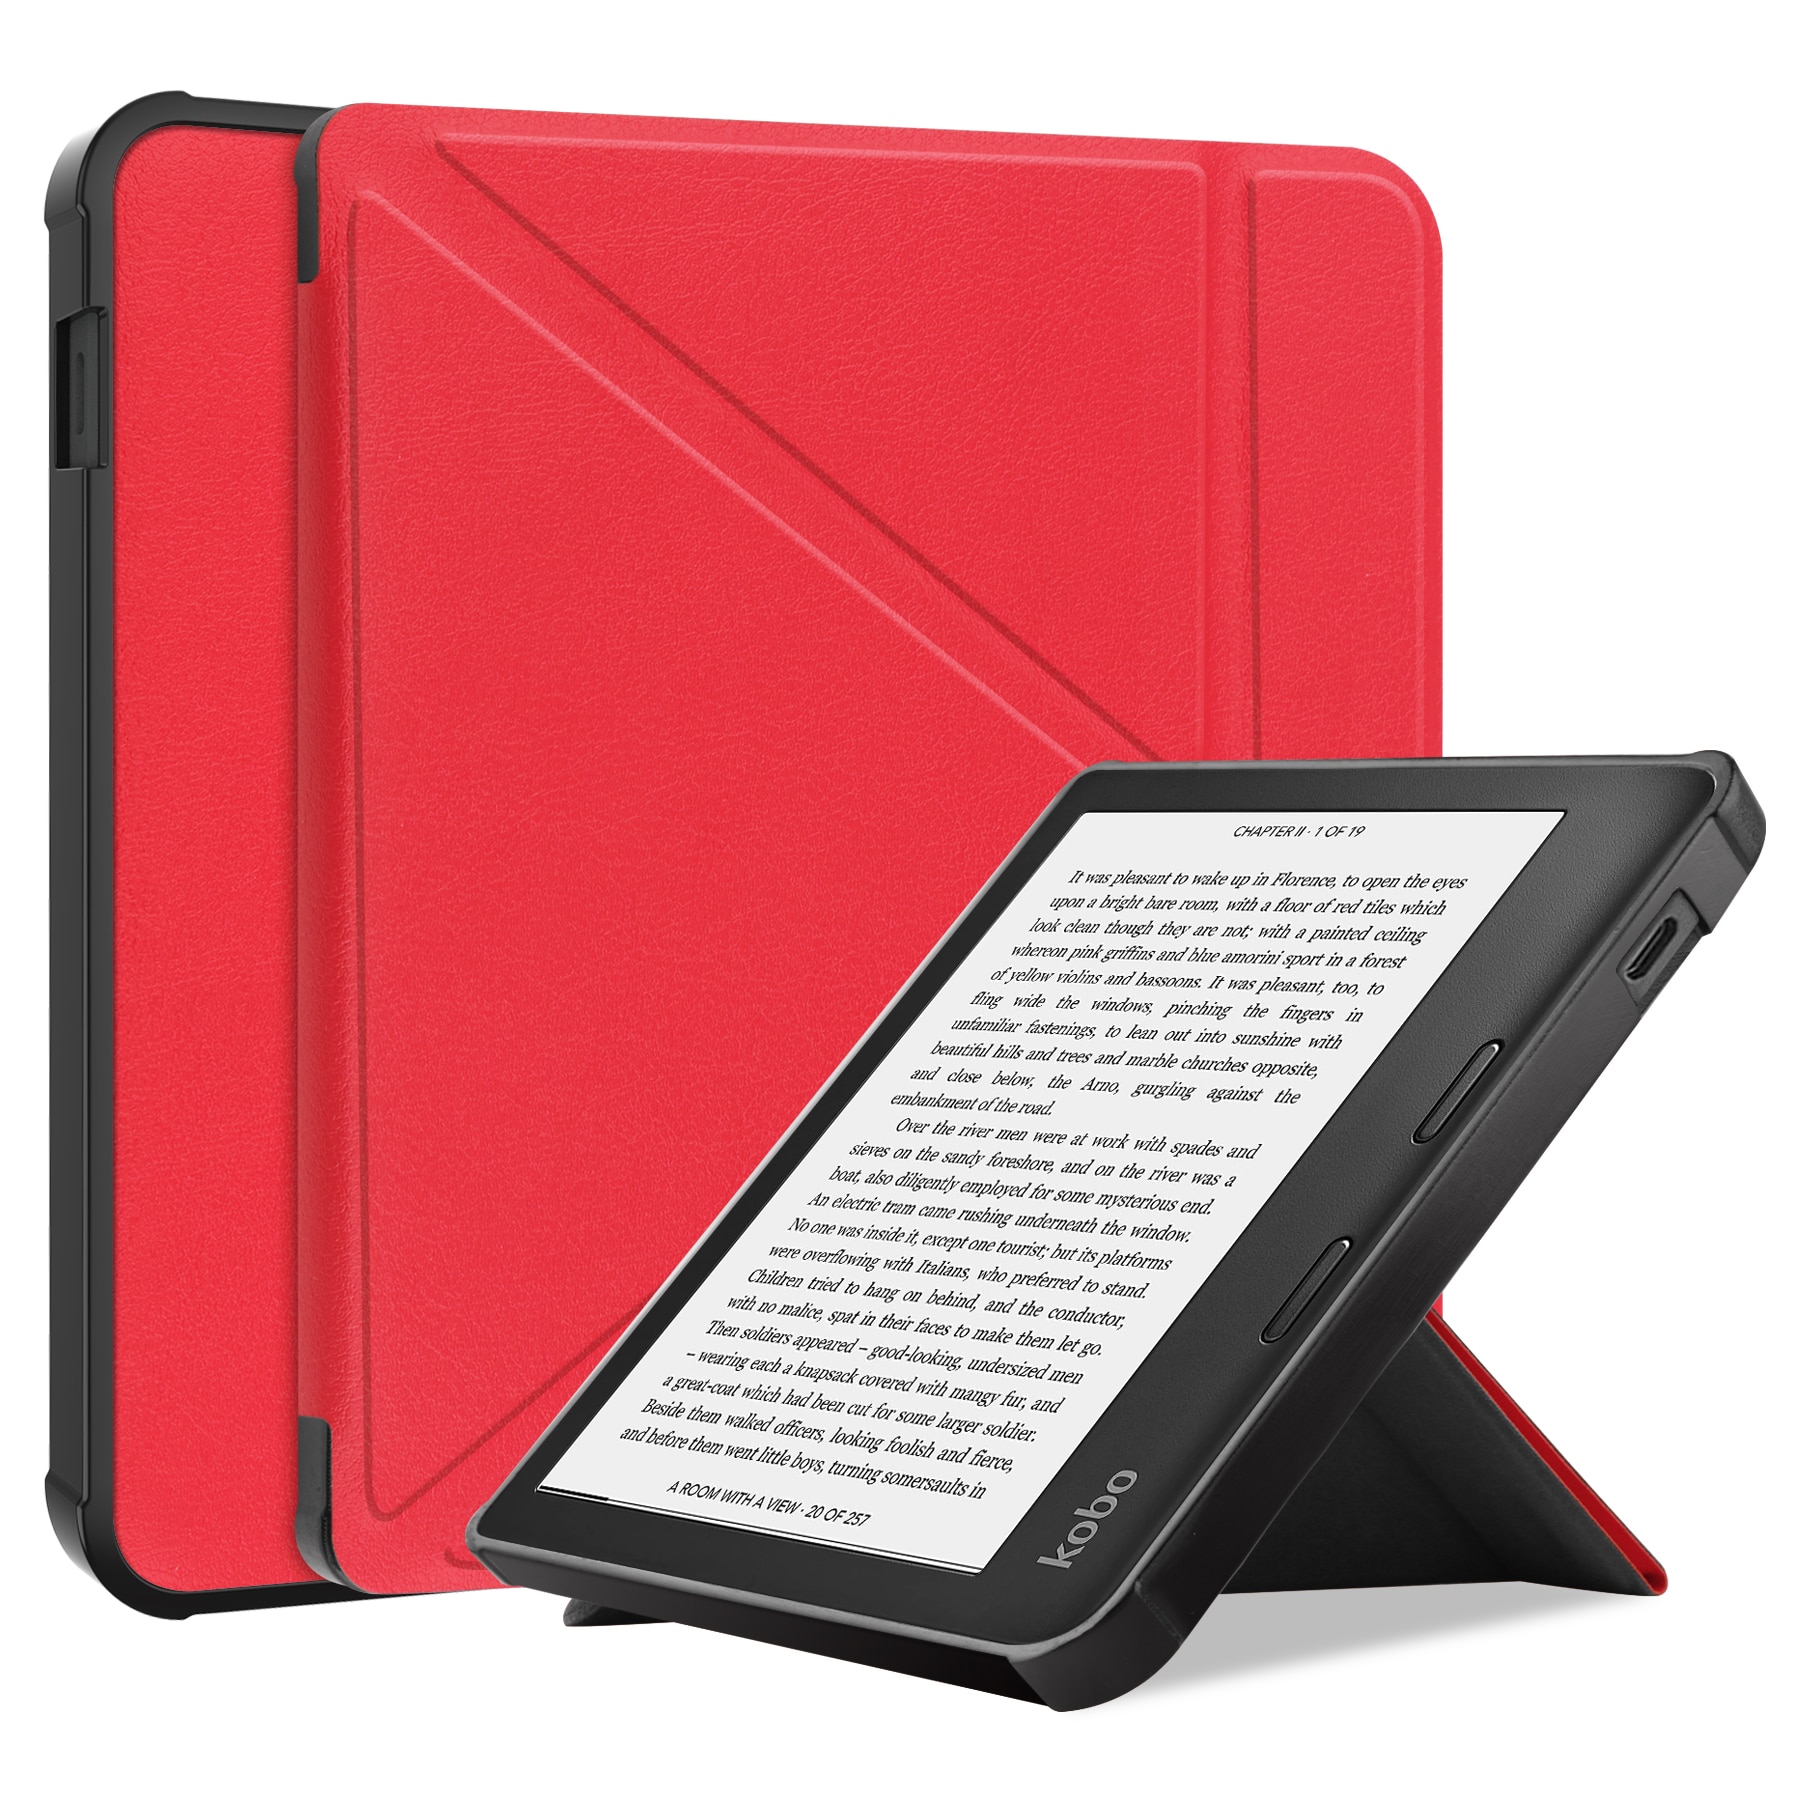 Slim Ultra Magnetic Stand Hard Back Shell Protective Cover Case For All-New Kobo  Libra 2